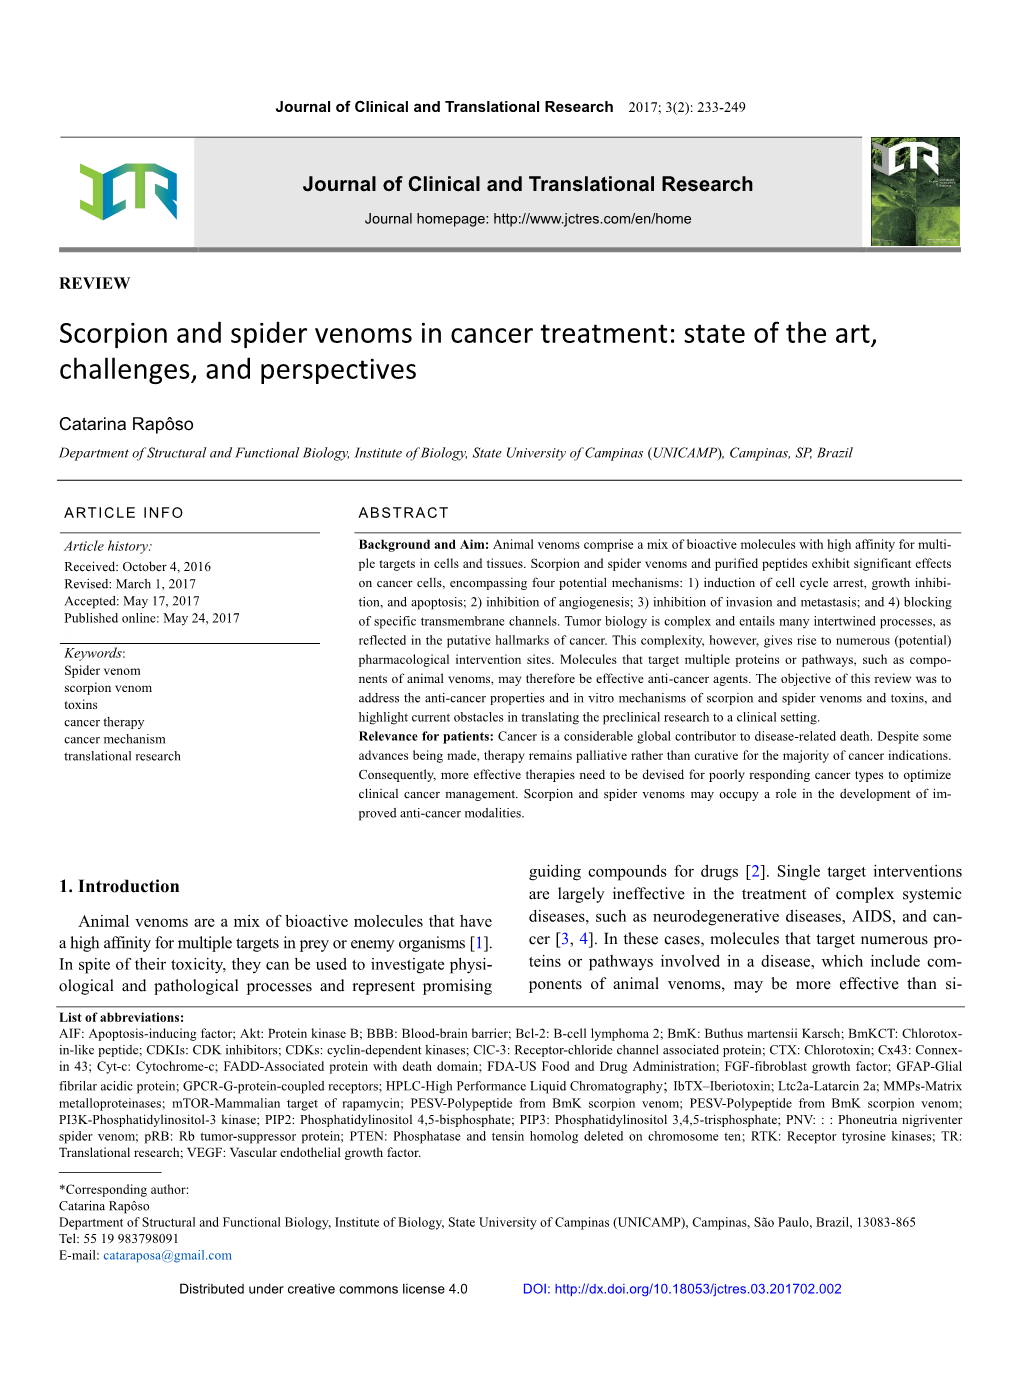 Scorpion and Spider Venoms in Cancer Treatment: State of the Art, Challenges, and Perspectives